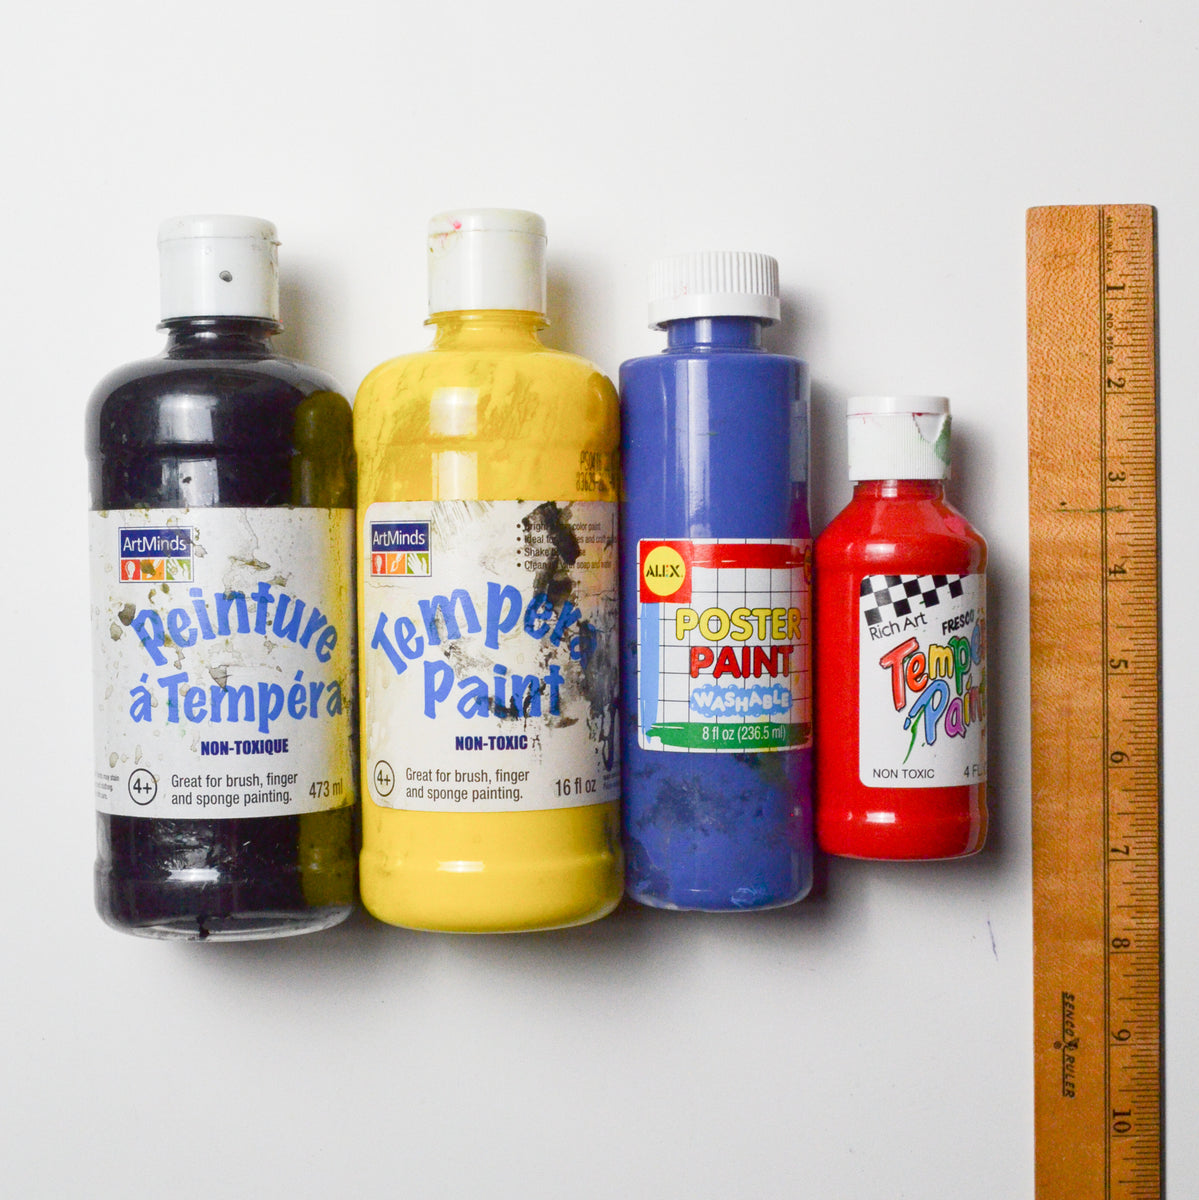 Retro Polytemps Paint Set. 1960s Polymer Tempera Paint Palette Set.  American Art and Clay Company 